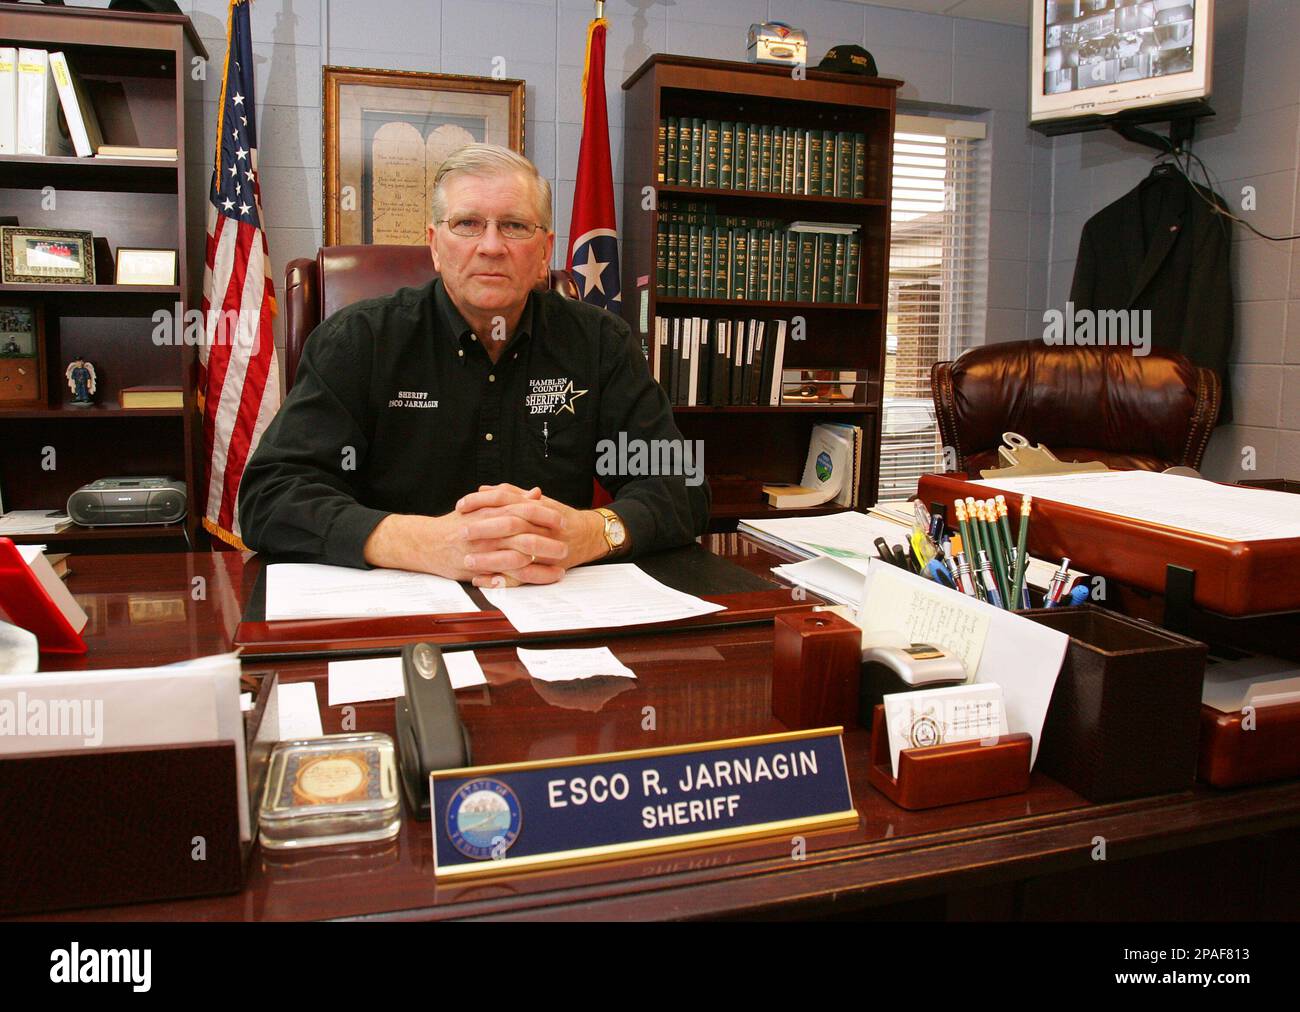 Hamblen County Sheriff Esco Jarnagin poses in his office Monday, Feb. 4,  2008 in Morristown, Tenn. Jarnagin says he's seeing a comeback in  bootlegging, which has a long history in Tennessee, a